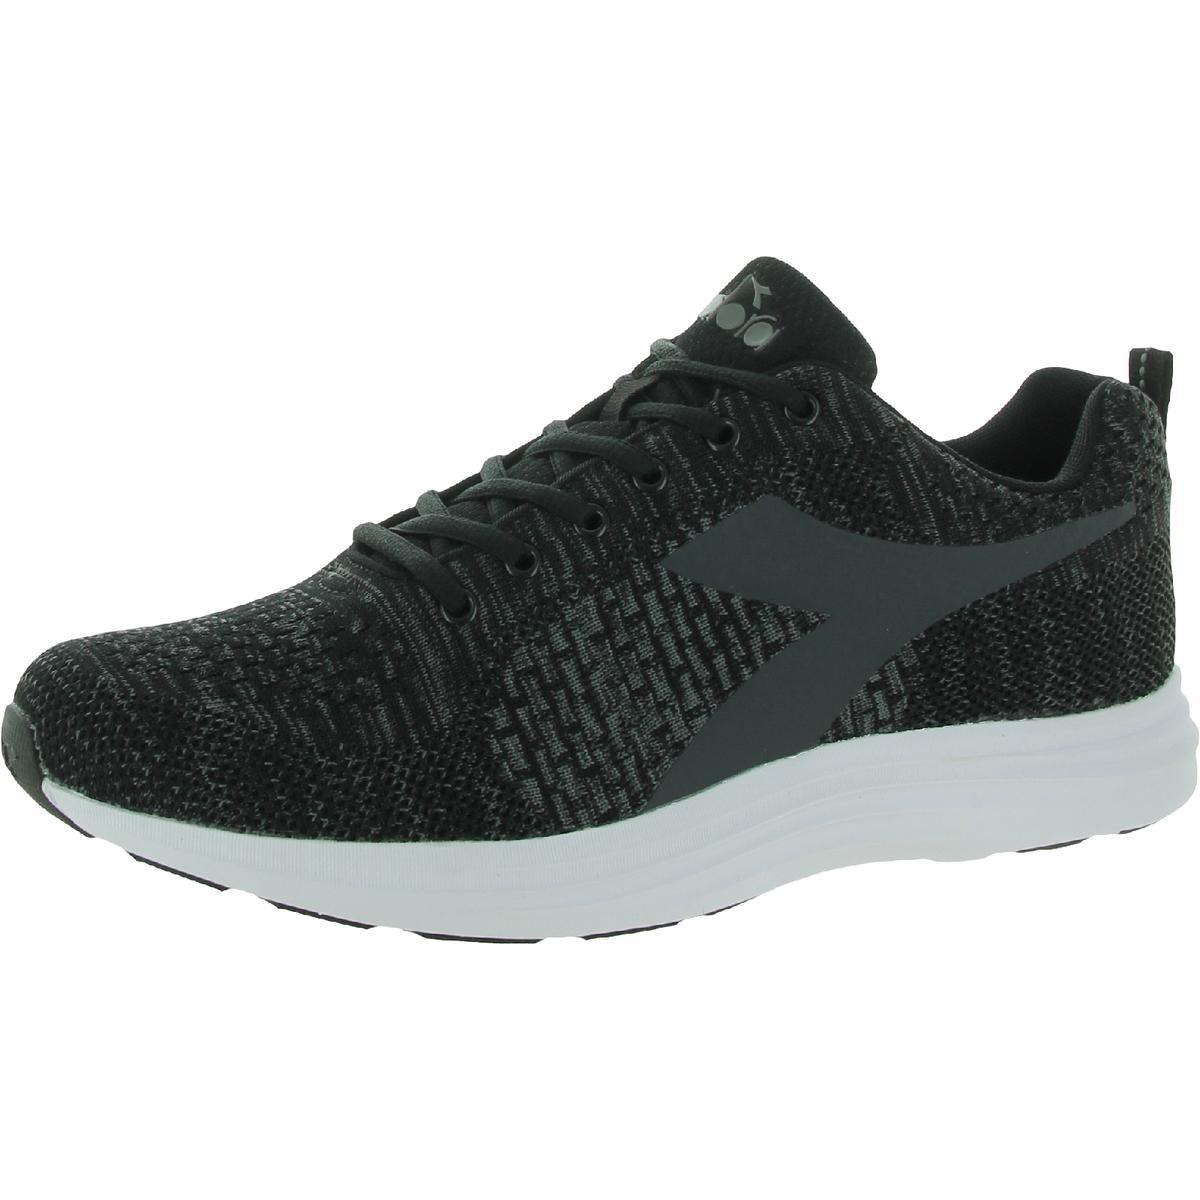 Diadora Mens Dinamica Fitness Workout Trainers Running Shoes Sneakers Bhfo 4341 Black/Steel Grey